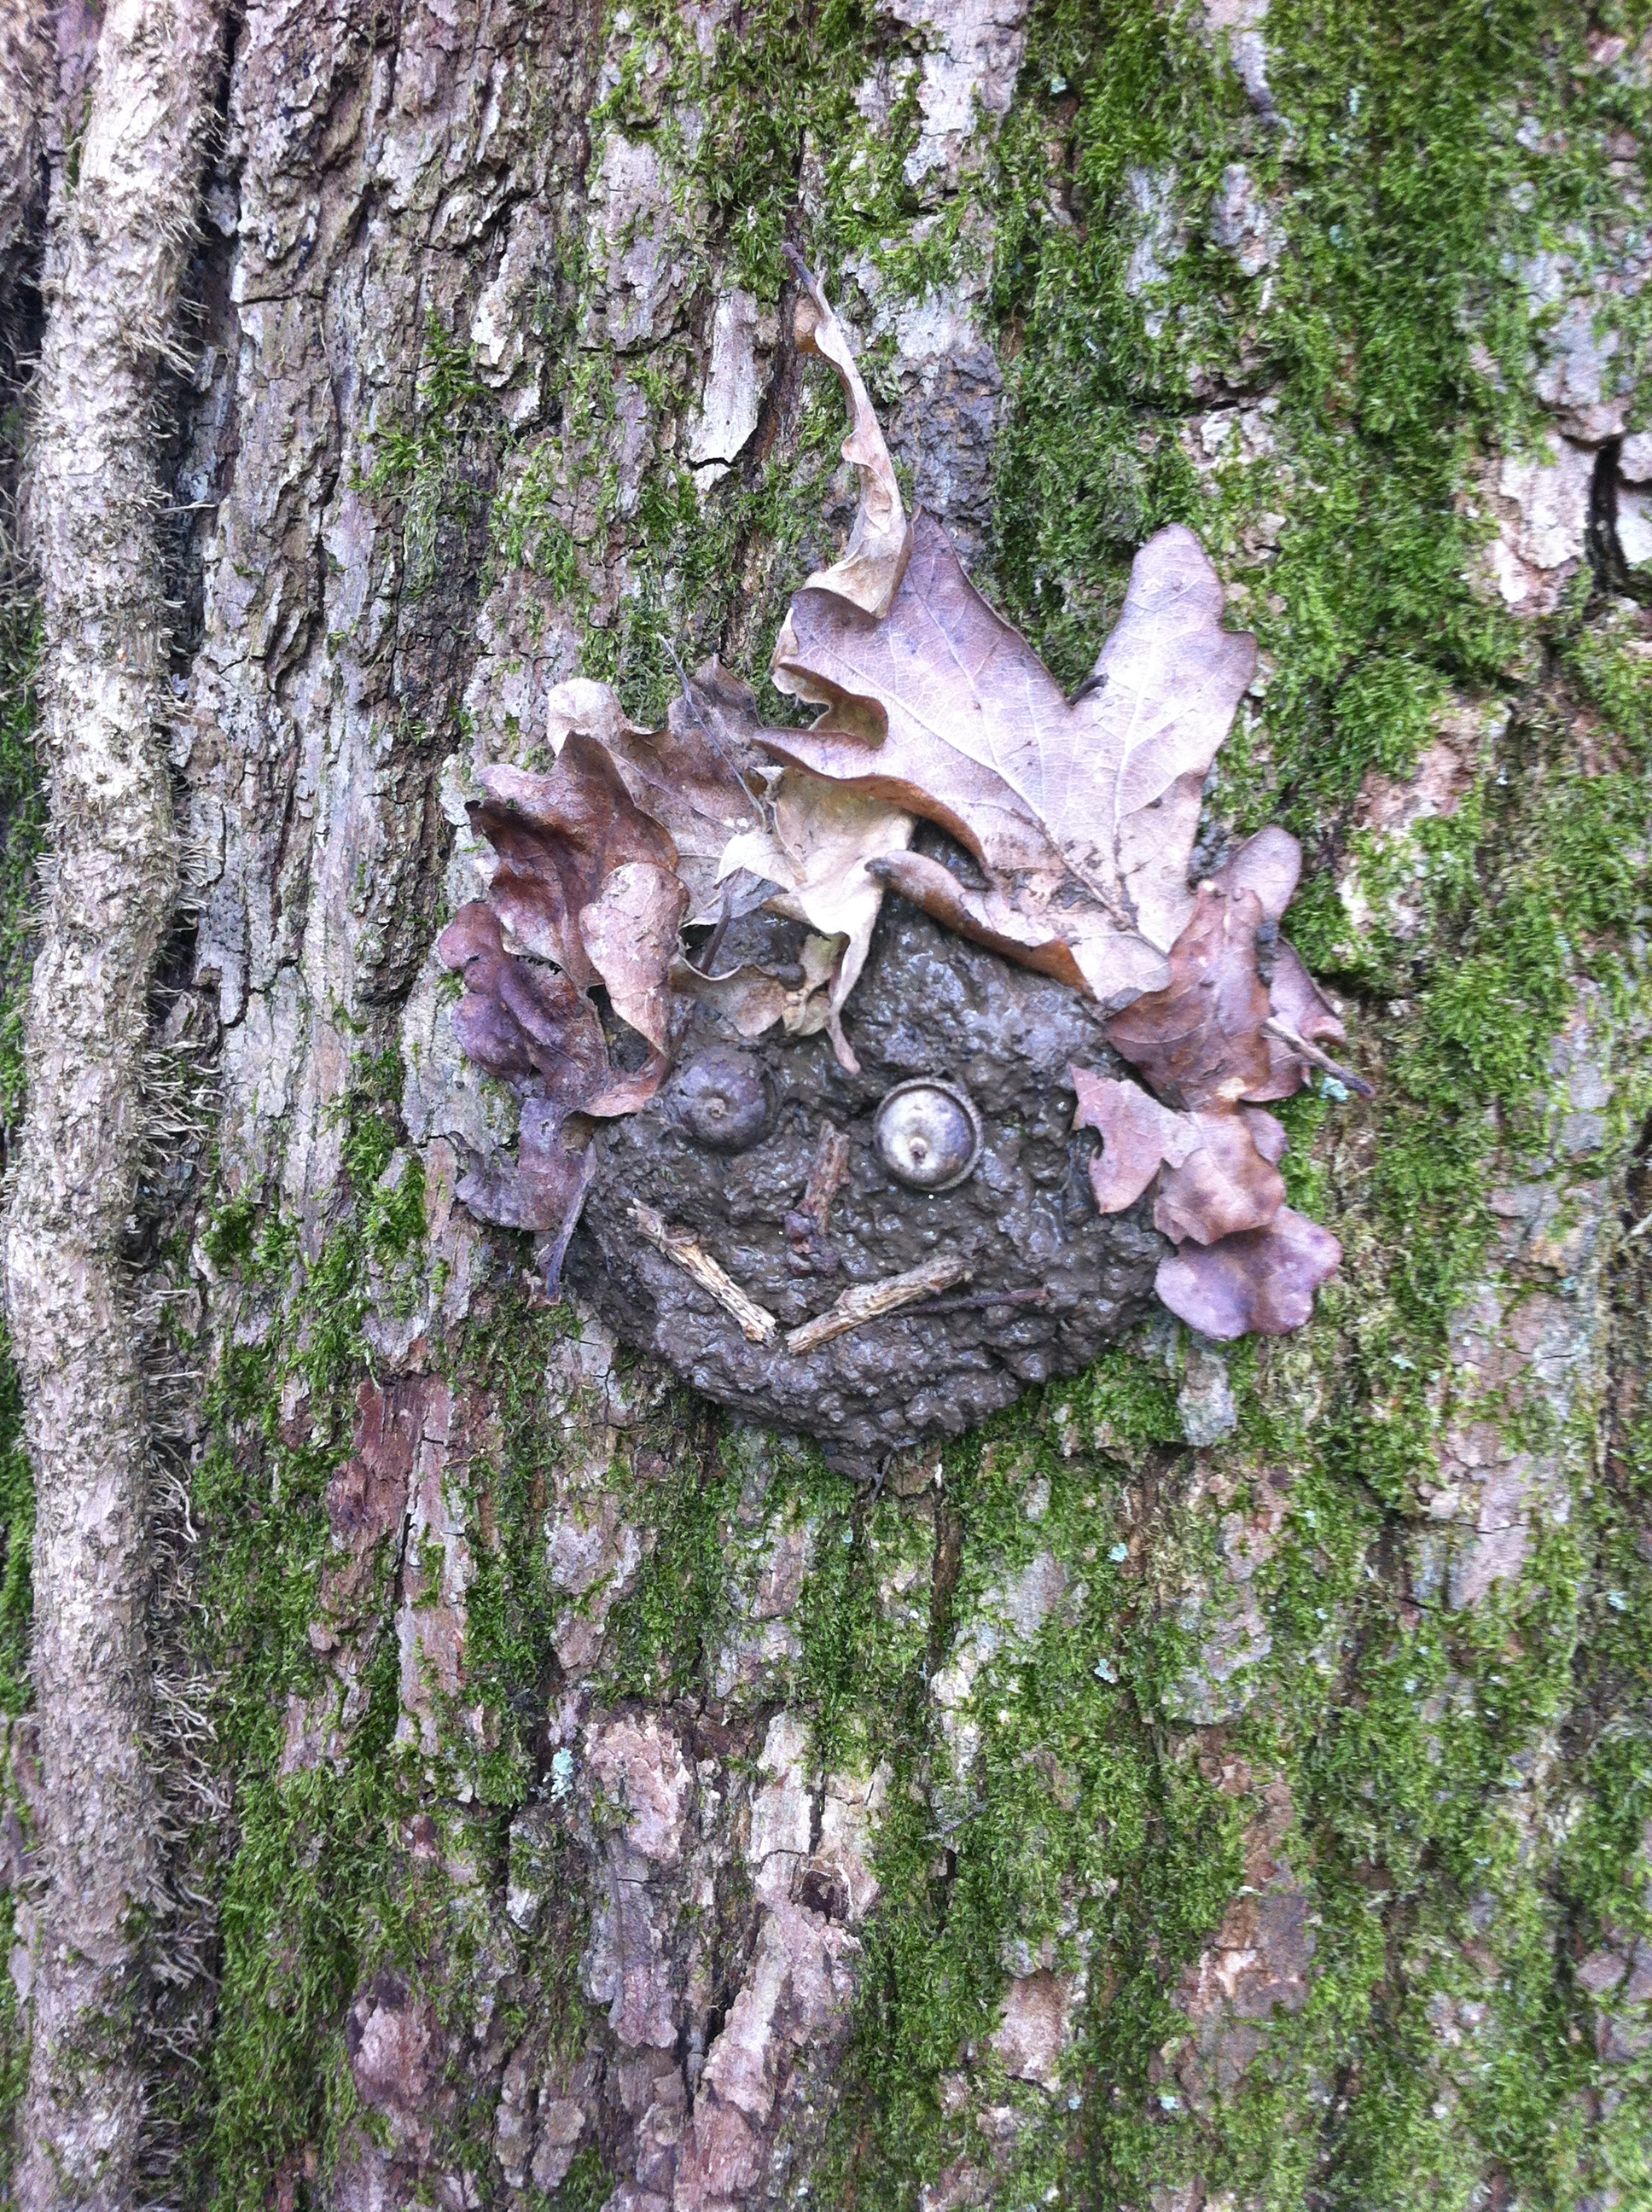 Forest-school smily face made from tree bark and leaves